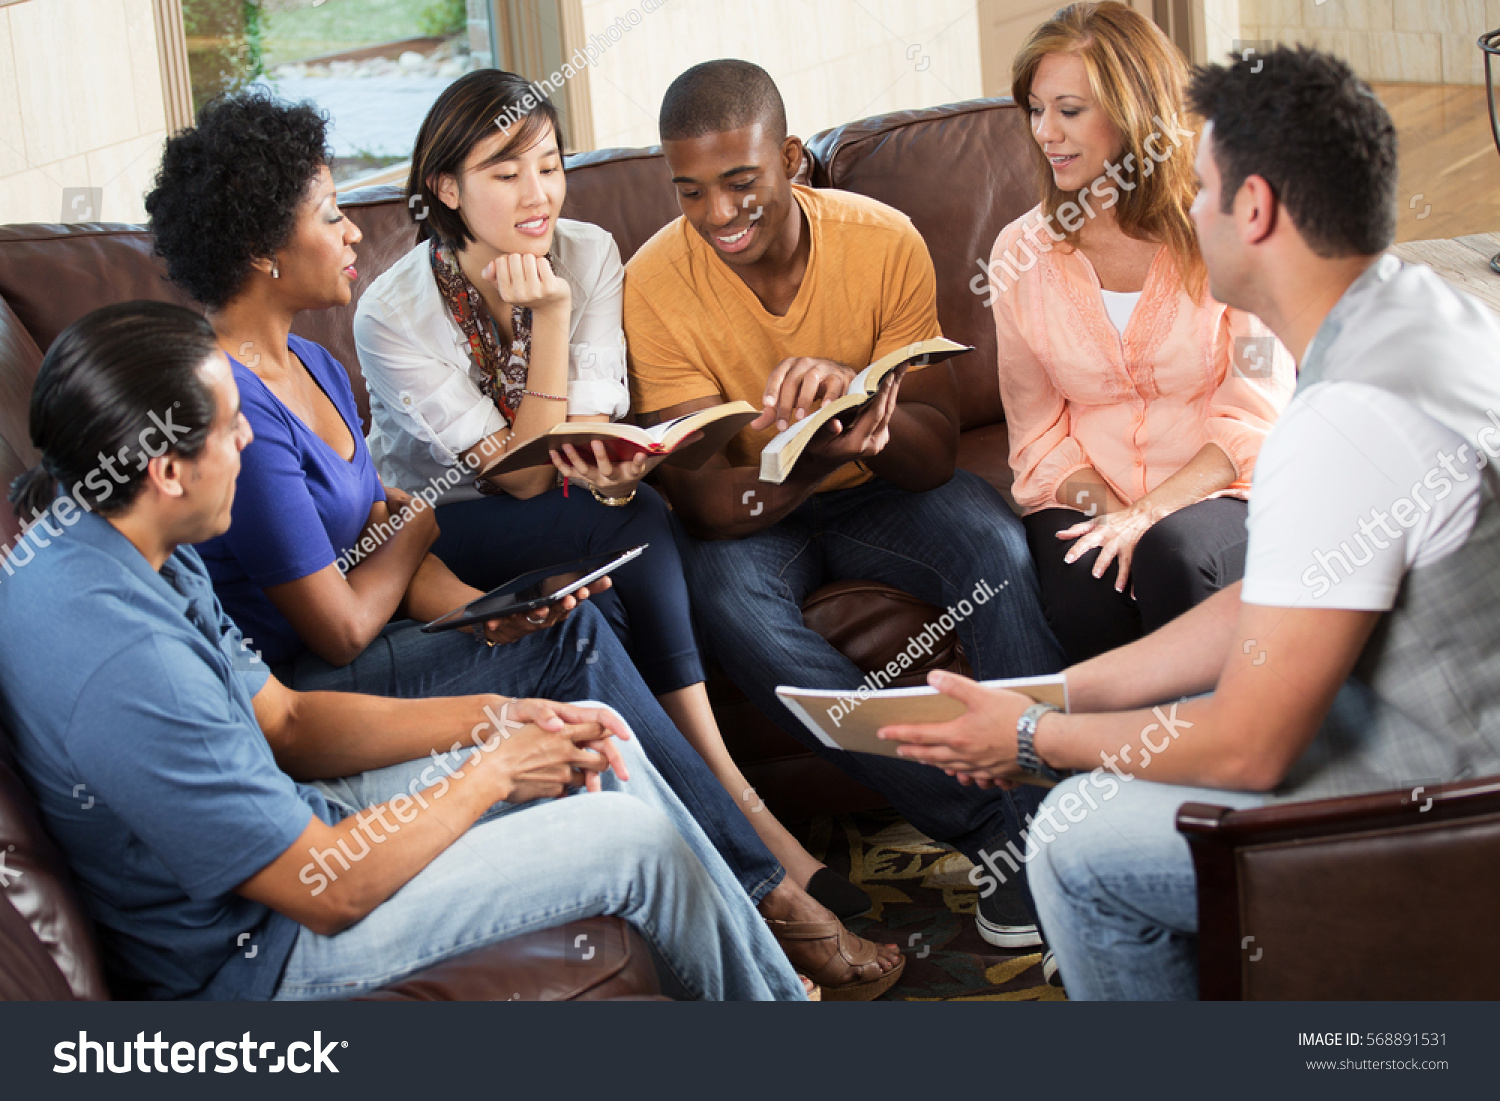 stock-photo-small-group-bible-study-568891531-marriage-designer